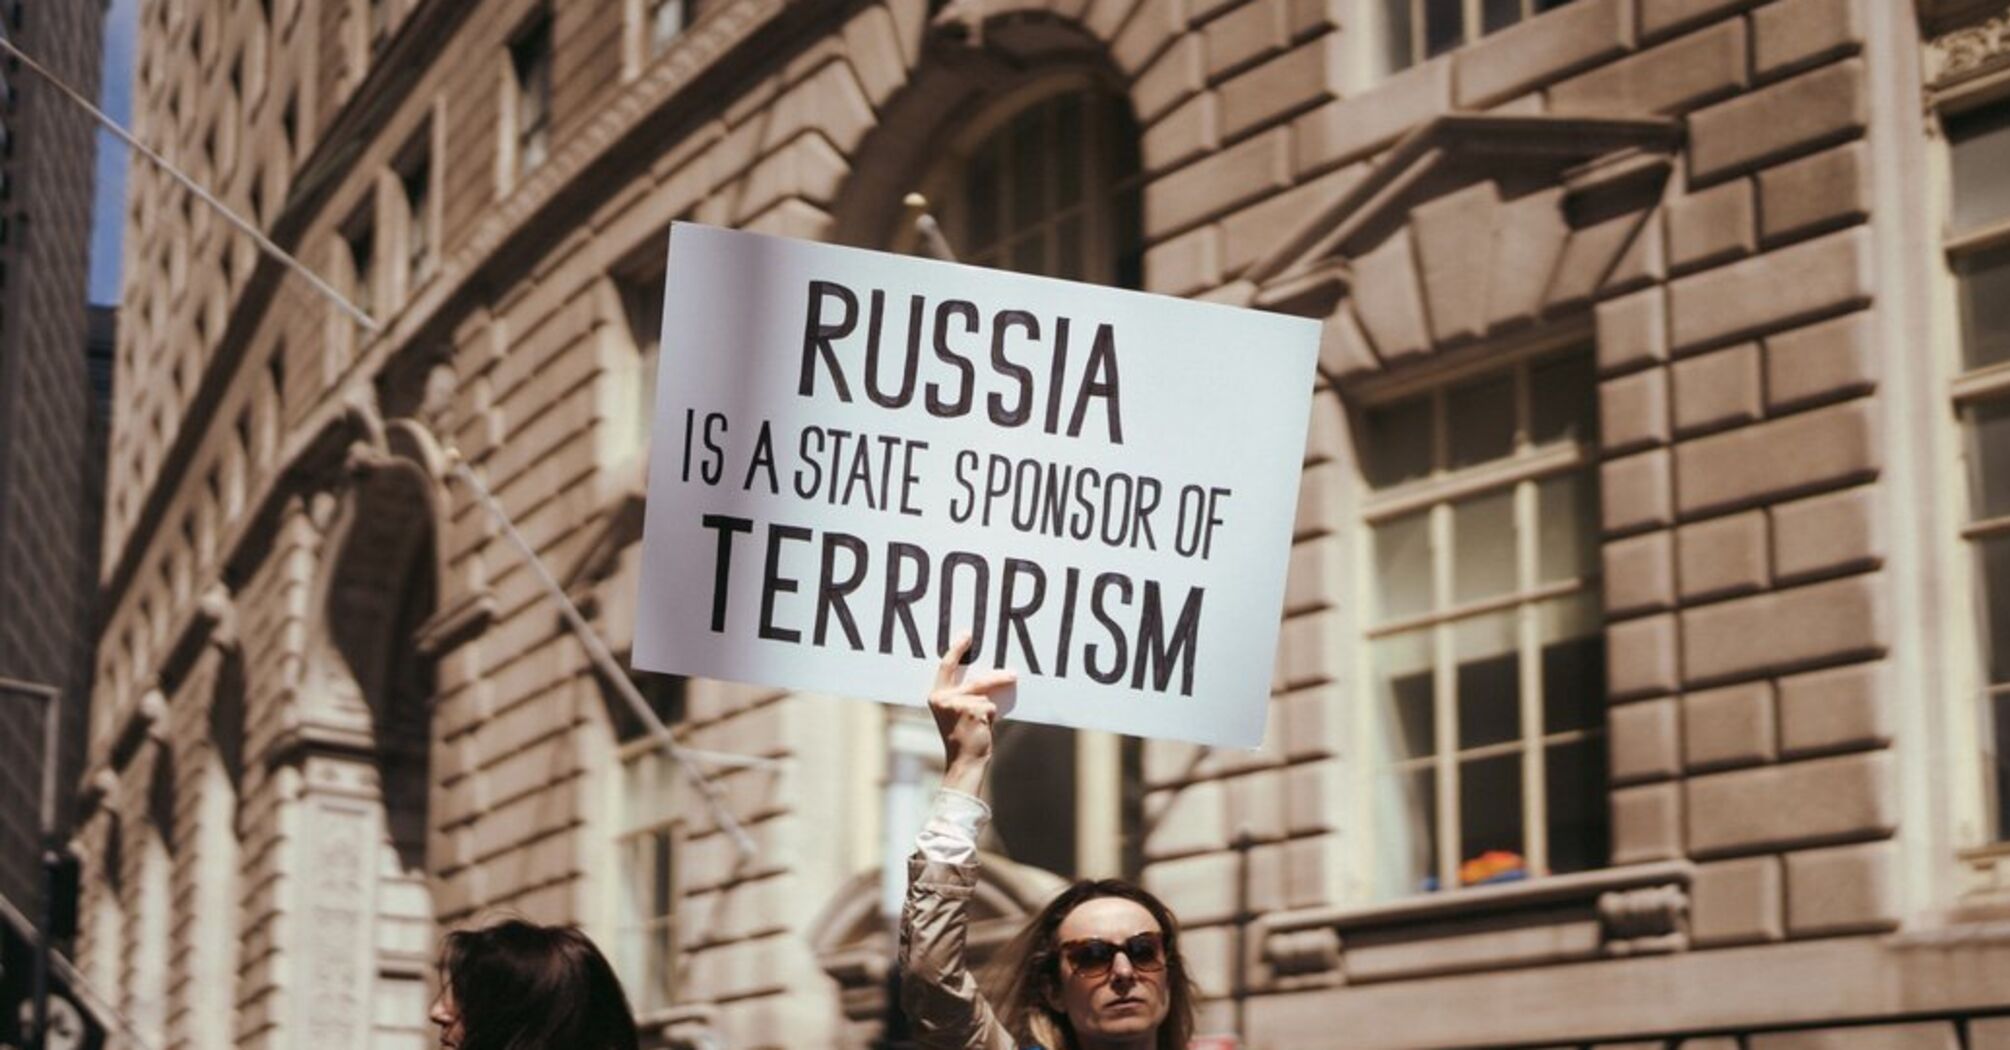 'There are more effective ways': the US State Department explains why it is against recognizing Russia as a state sponsor of terrorism